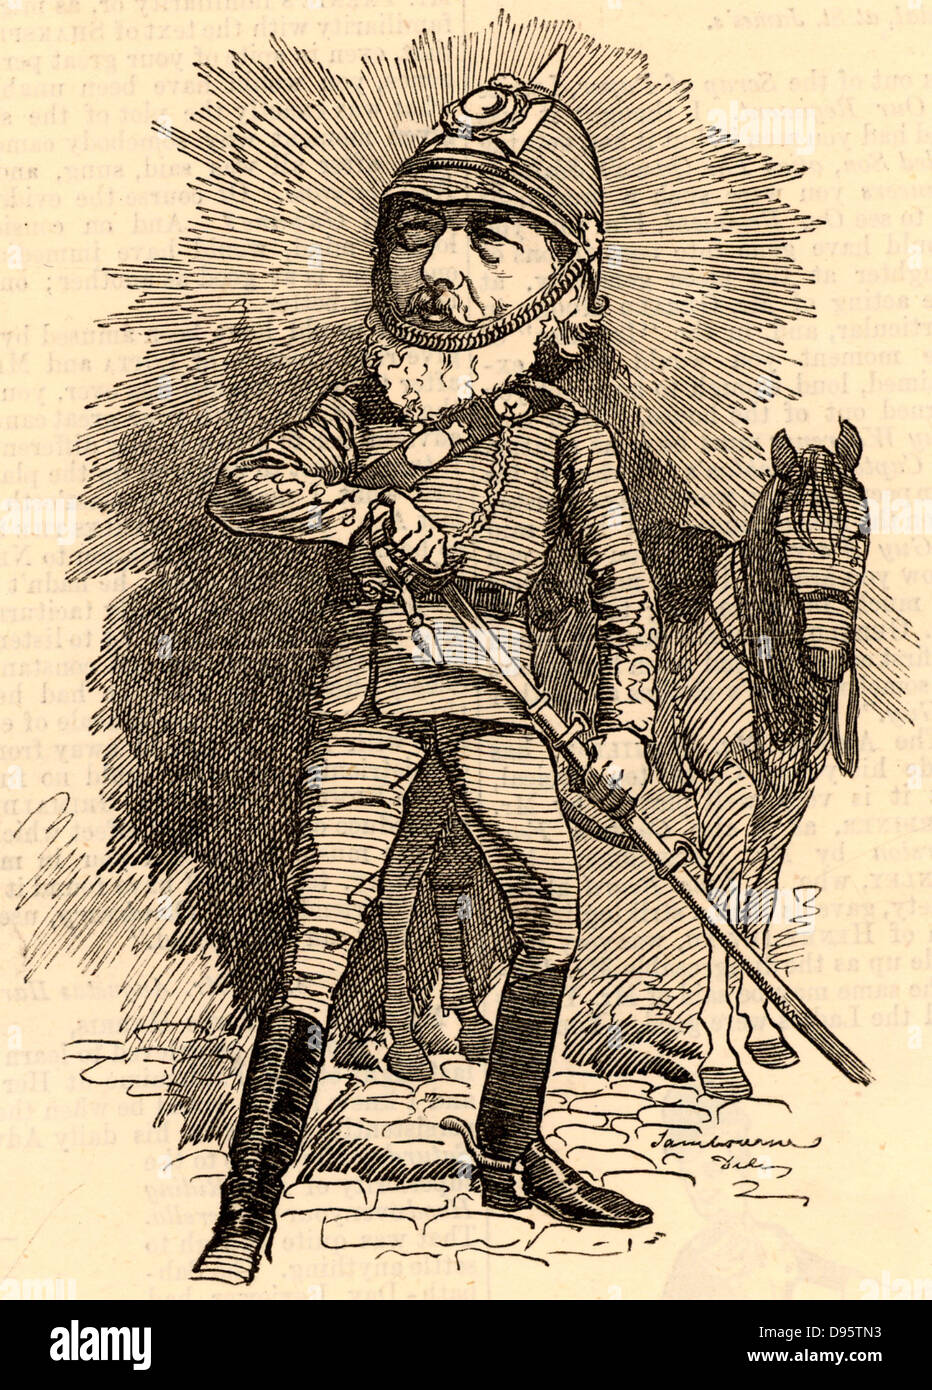 Frederick or Frederic, Lord Leighton (1830-1896) English painter and sculptor born at Scarborough, Yorkshire. President of the Royal Academy 1878-1896. Leighton in military uniform on his retirement as Colonel of the Artists' Rifles (Middlesex (Artists') Rifle Volunteer Corps). Cartoon by Edward Linley Sambourne in the Punch's Fancy Portraits series from 'Punch' (London, 16 February 1884). Stock Photo